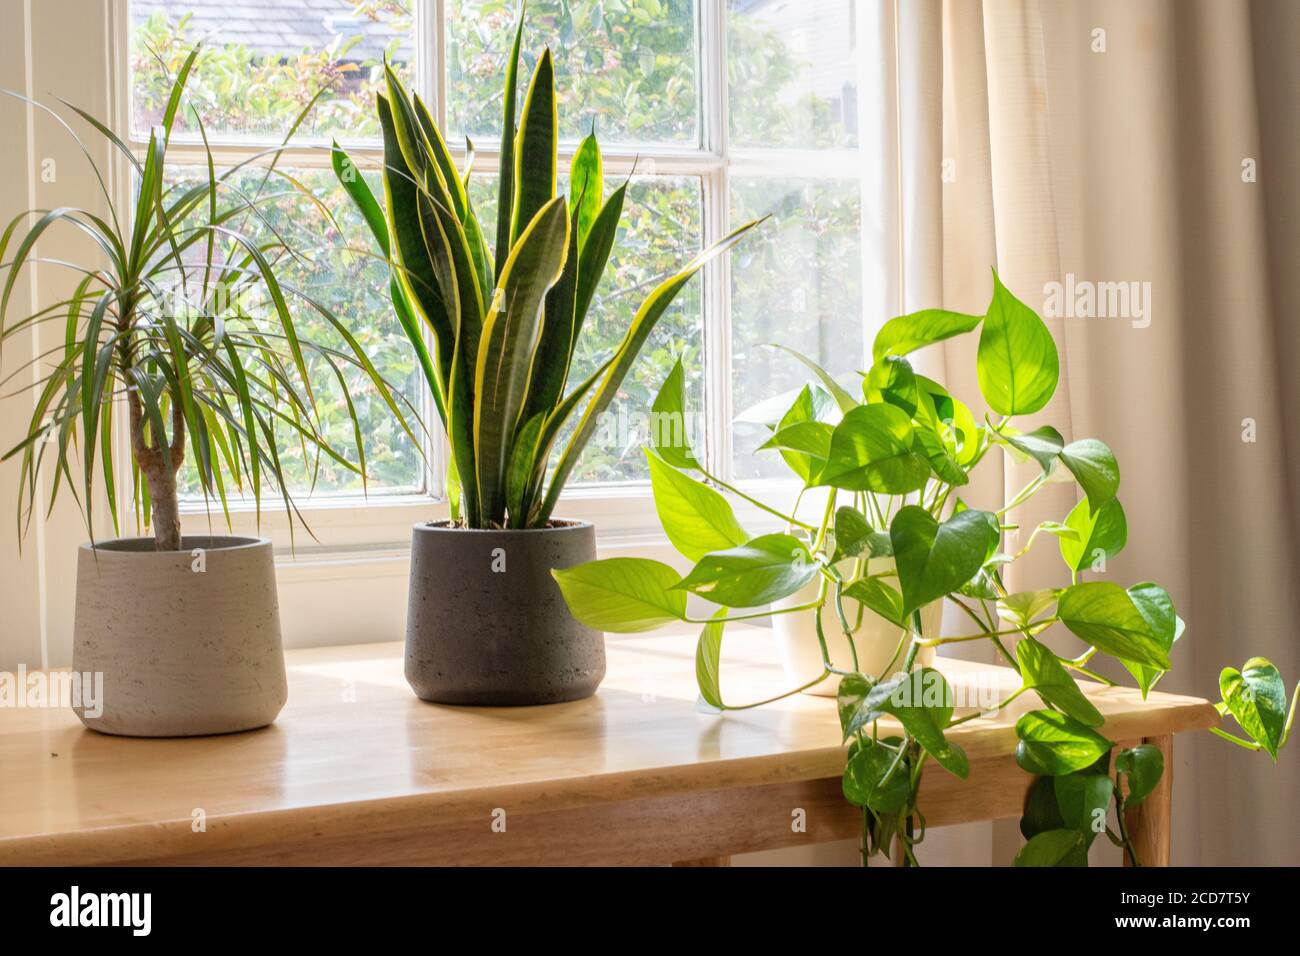 Dragon plant and devils Ivy in a beautifully designed home or apartment interior. Stock Photo